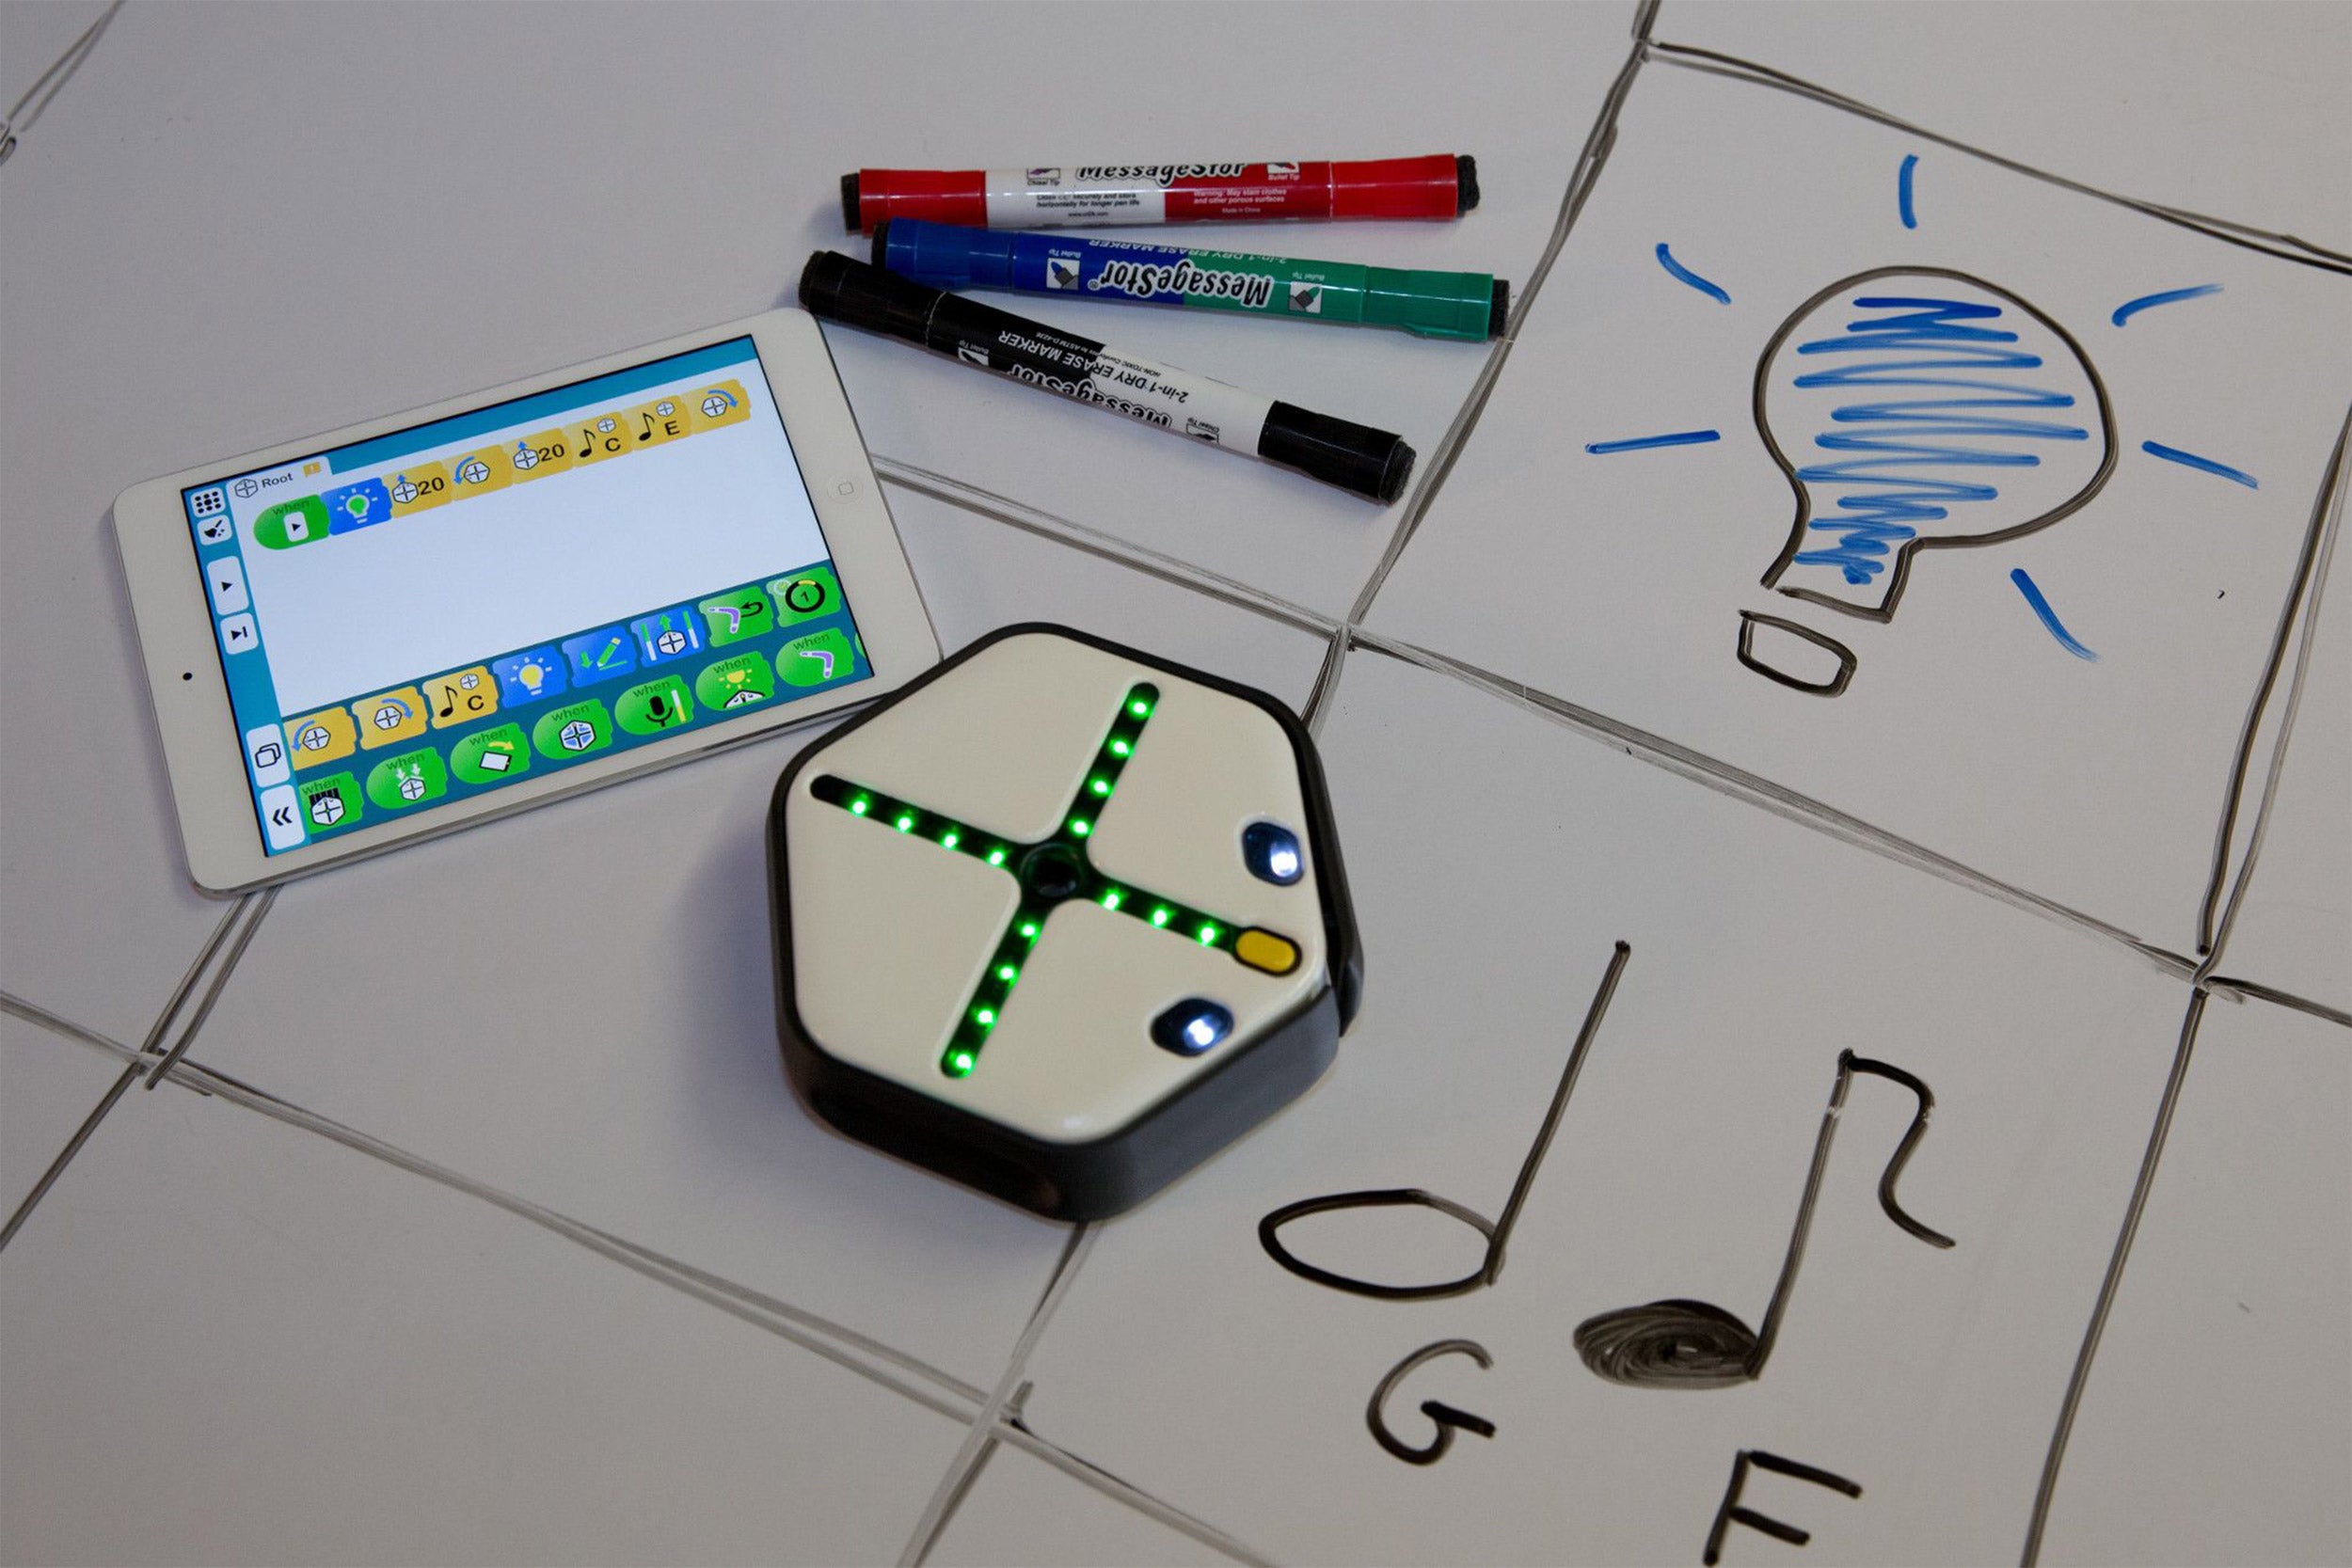 The Root robot with a whiteboard and iPad